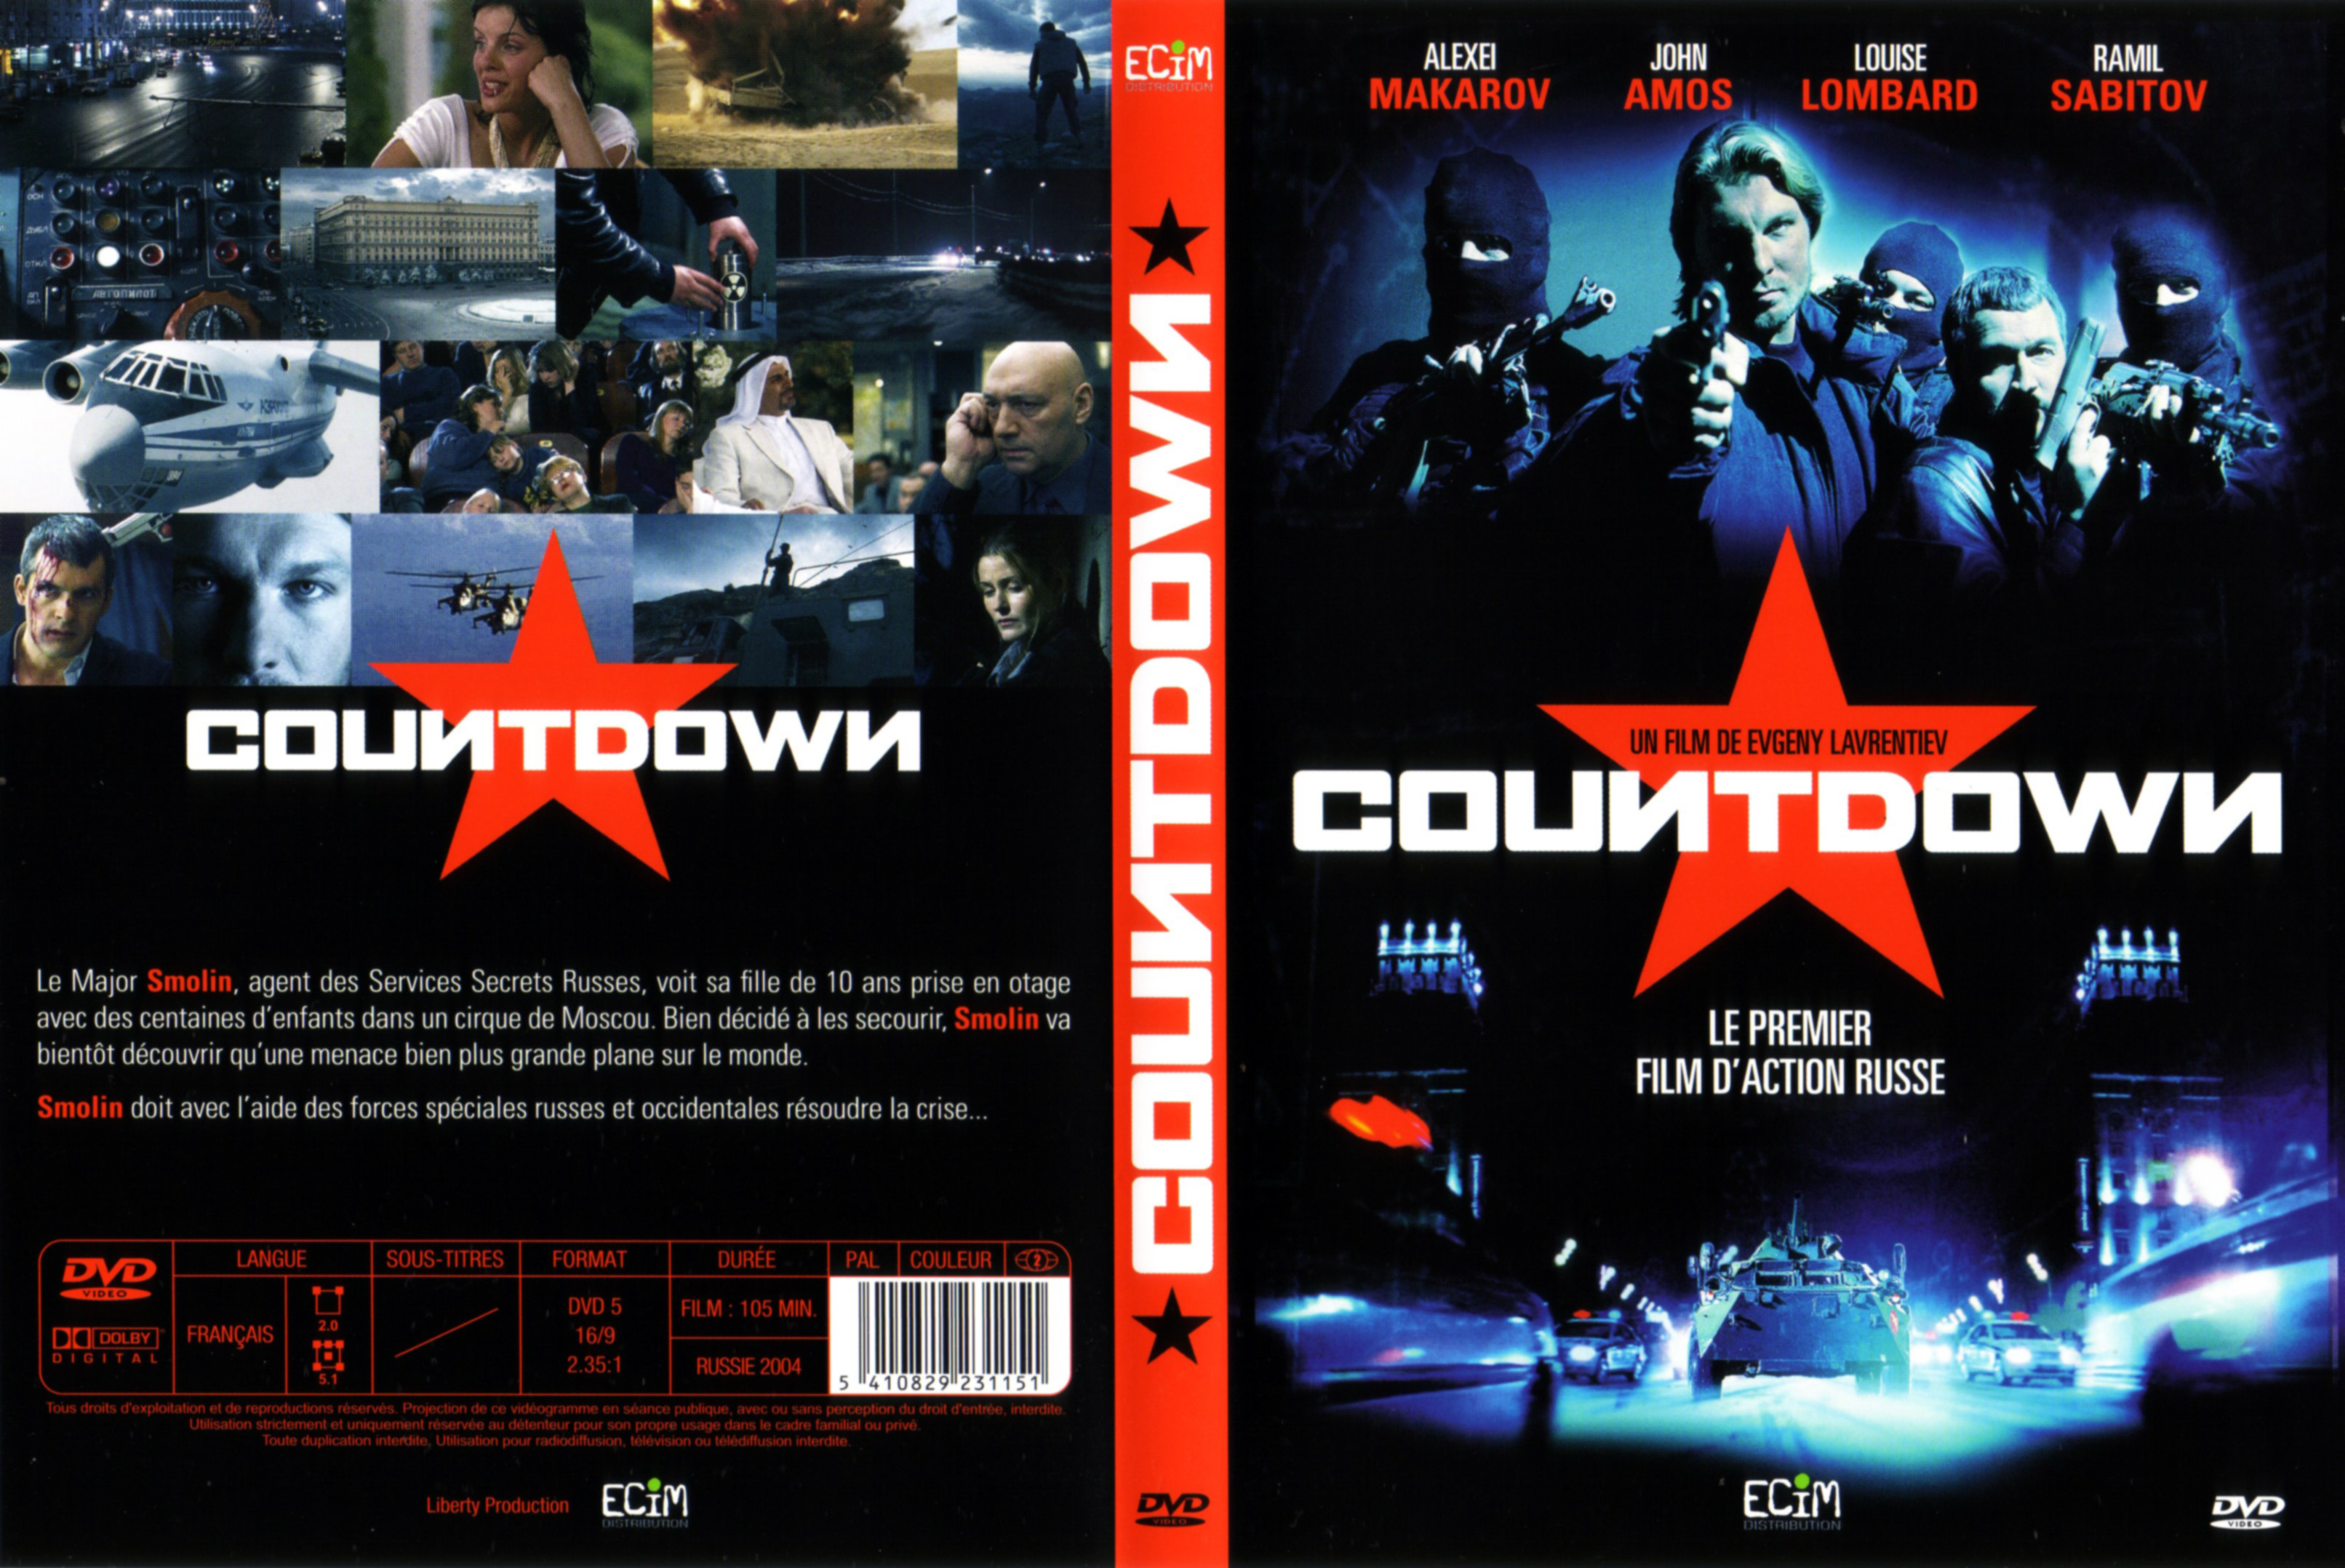 Jaquette DVD Countdown v2